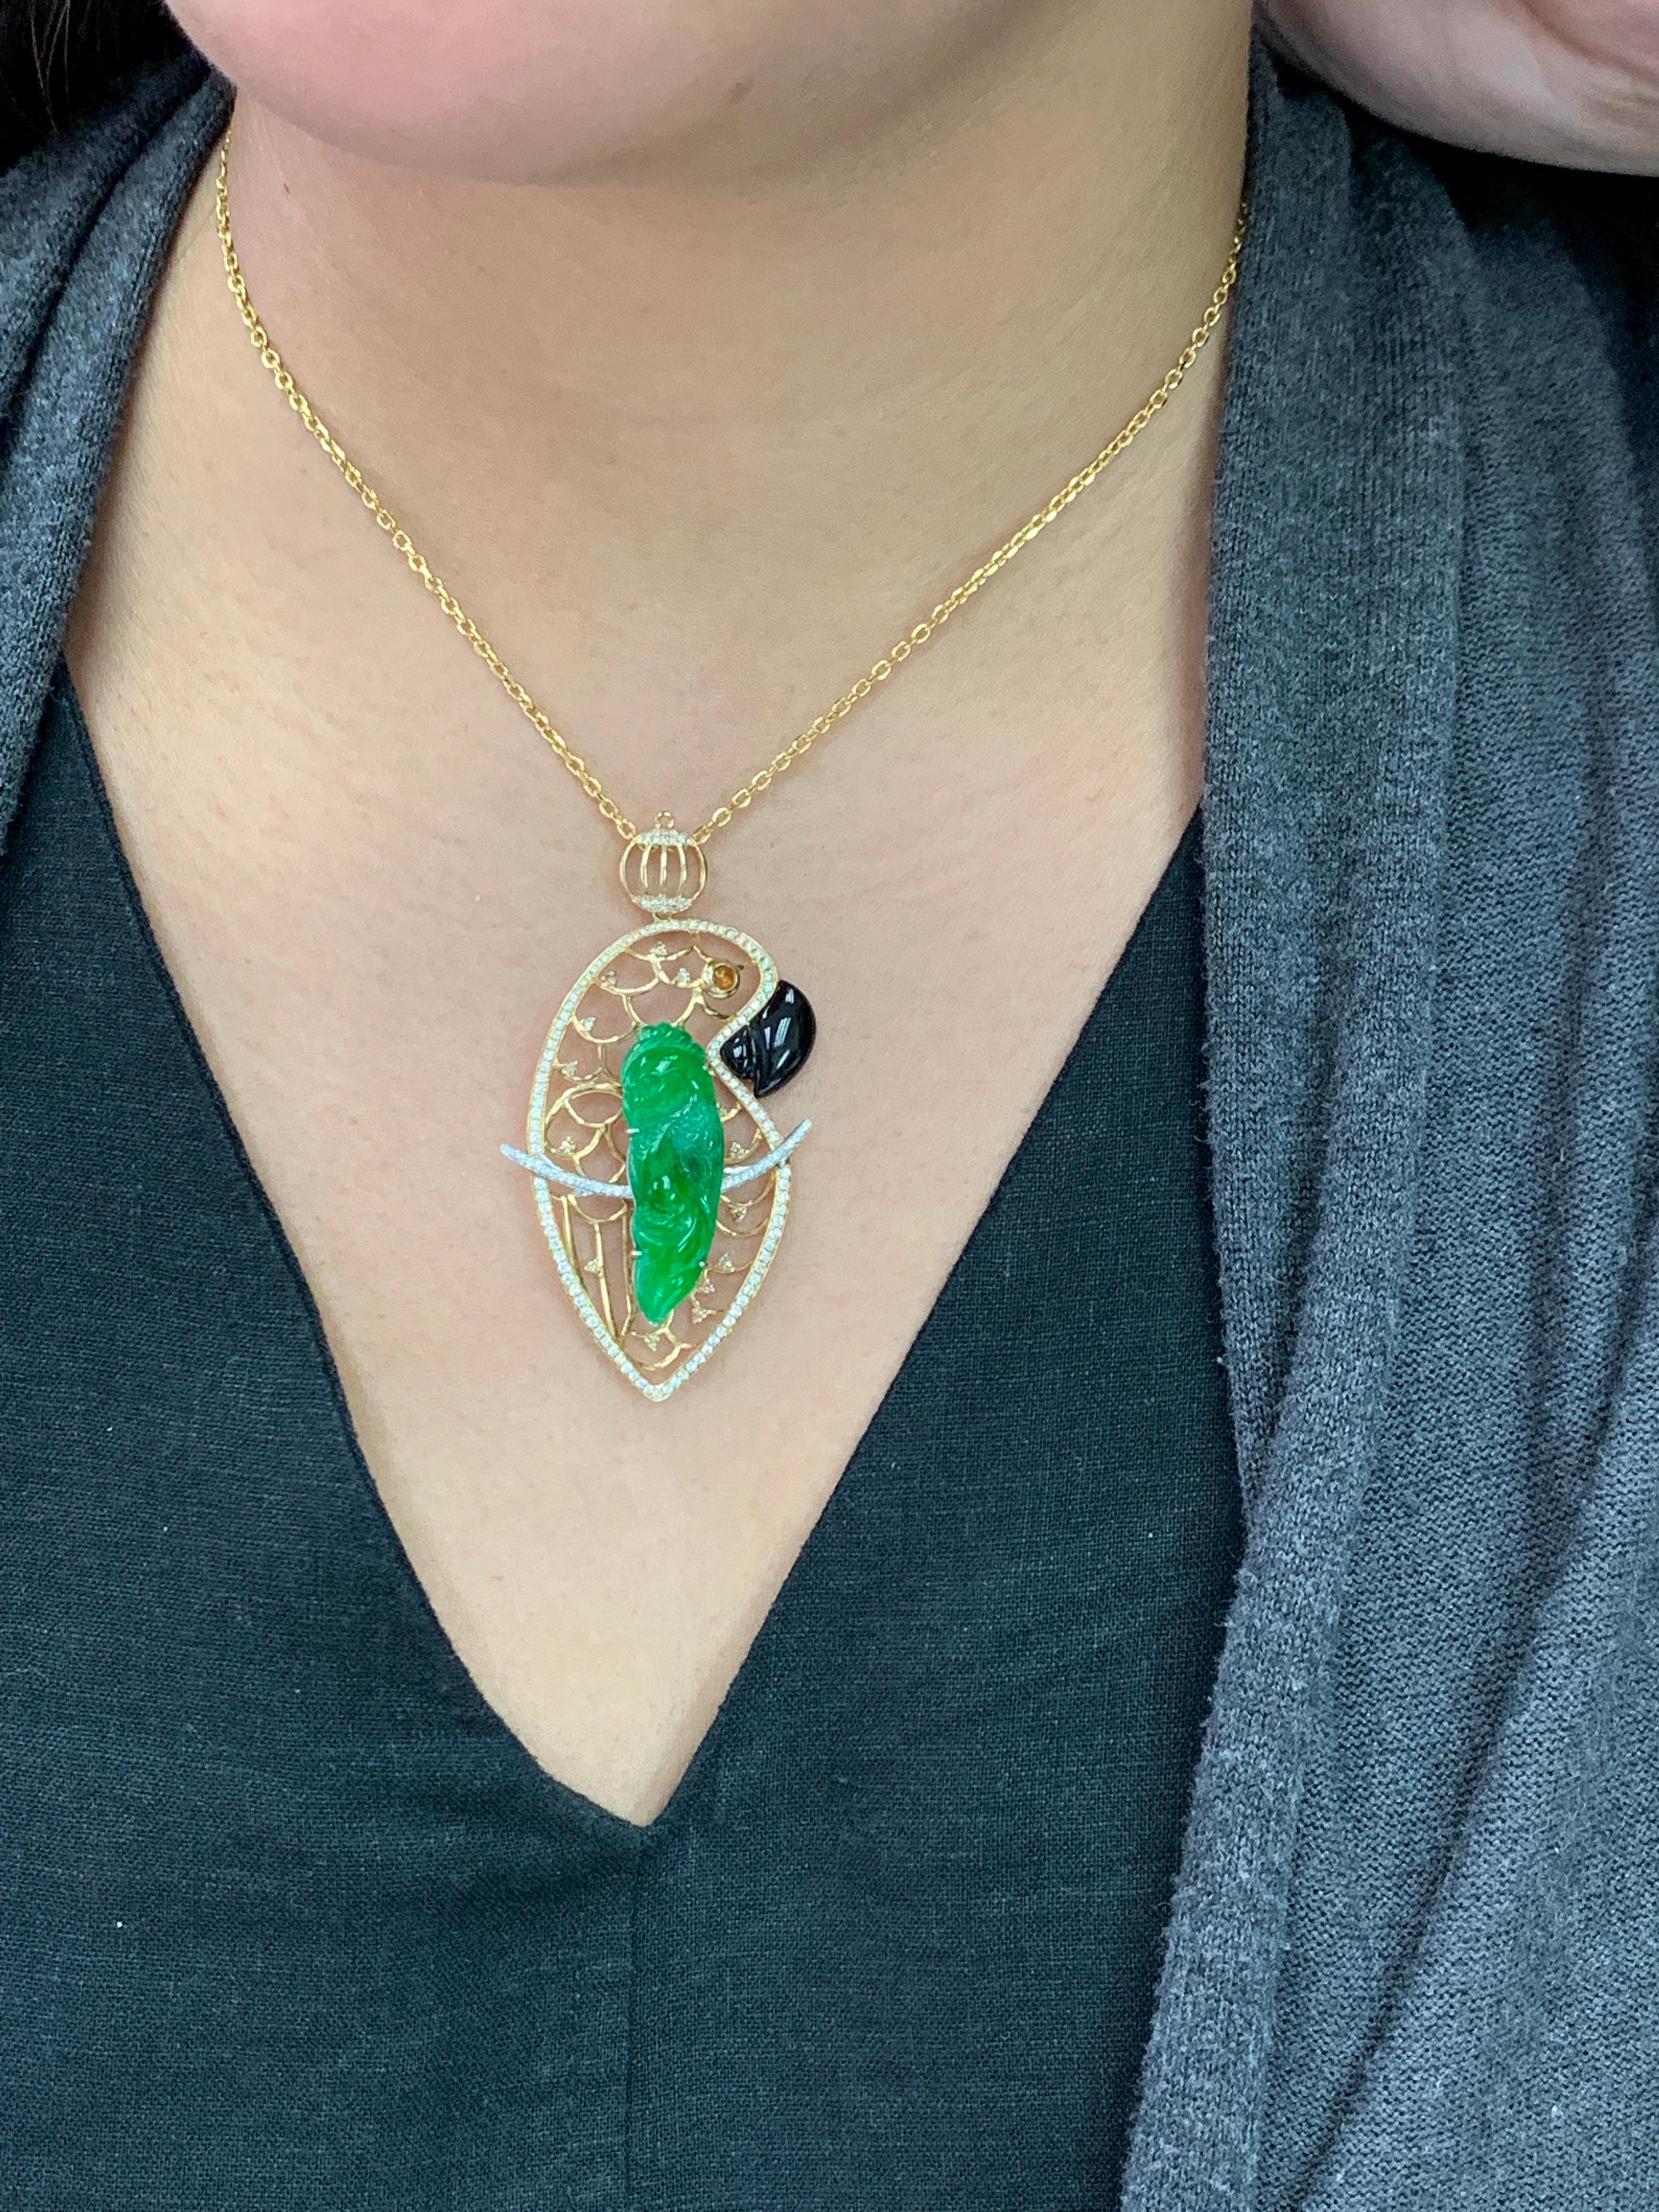 The design of this Parrot within a Parrot is quite clever! Here is a vivid green Jade and diamond parrot pendant. It is certified. The carved parrot is vivid green and close to the best color in Jade. Best color being imperial green. (just one shade